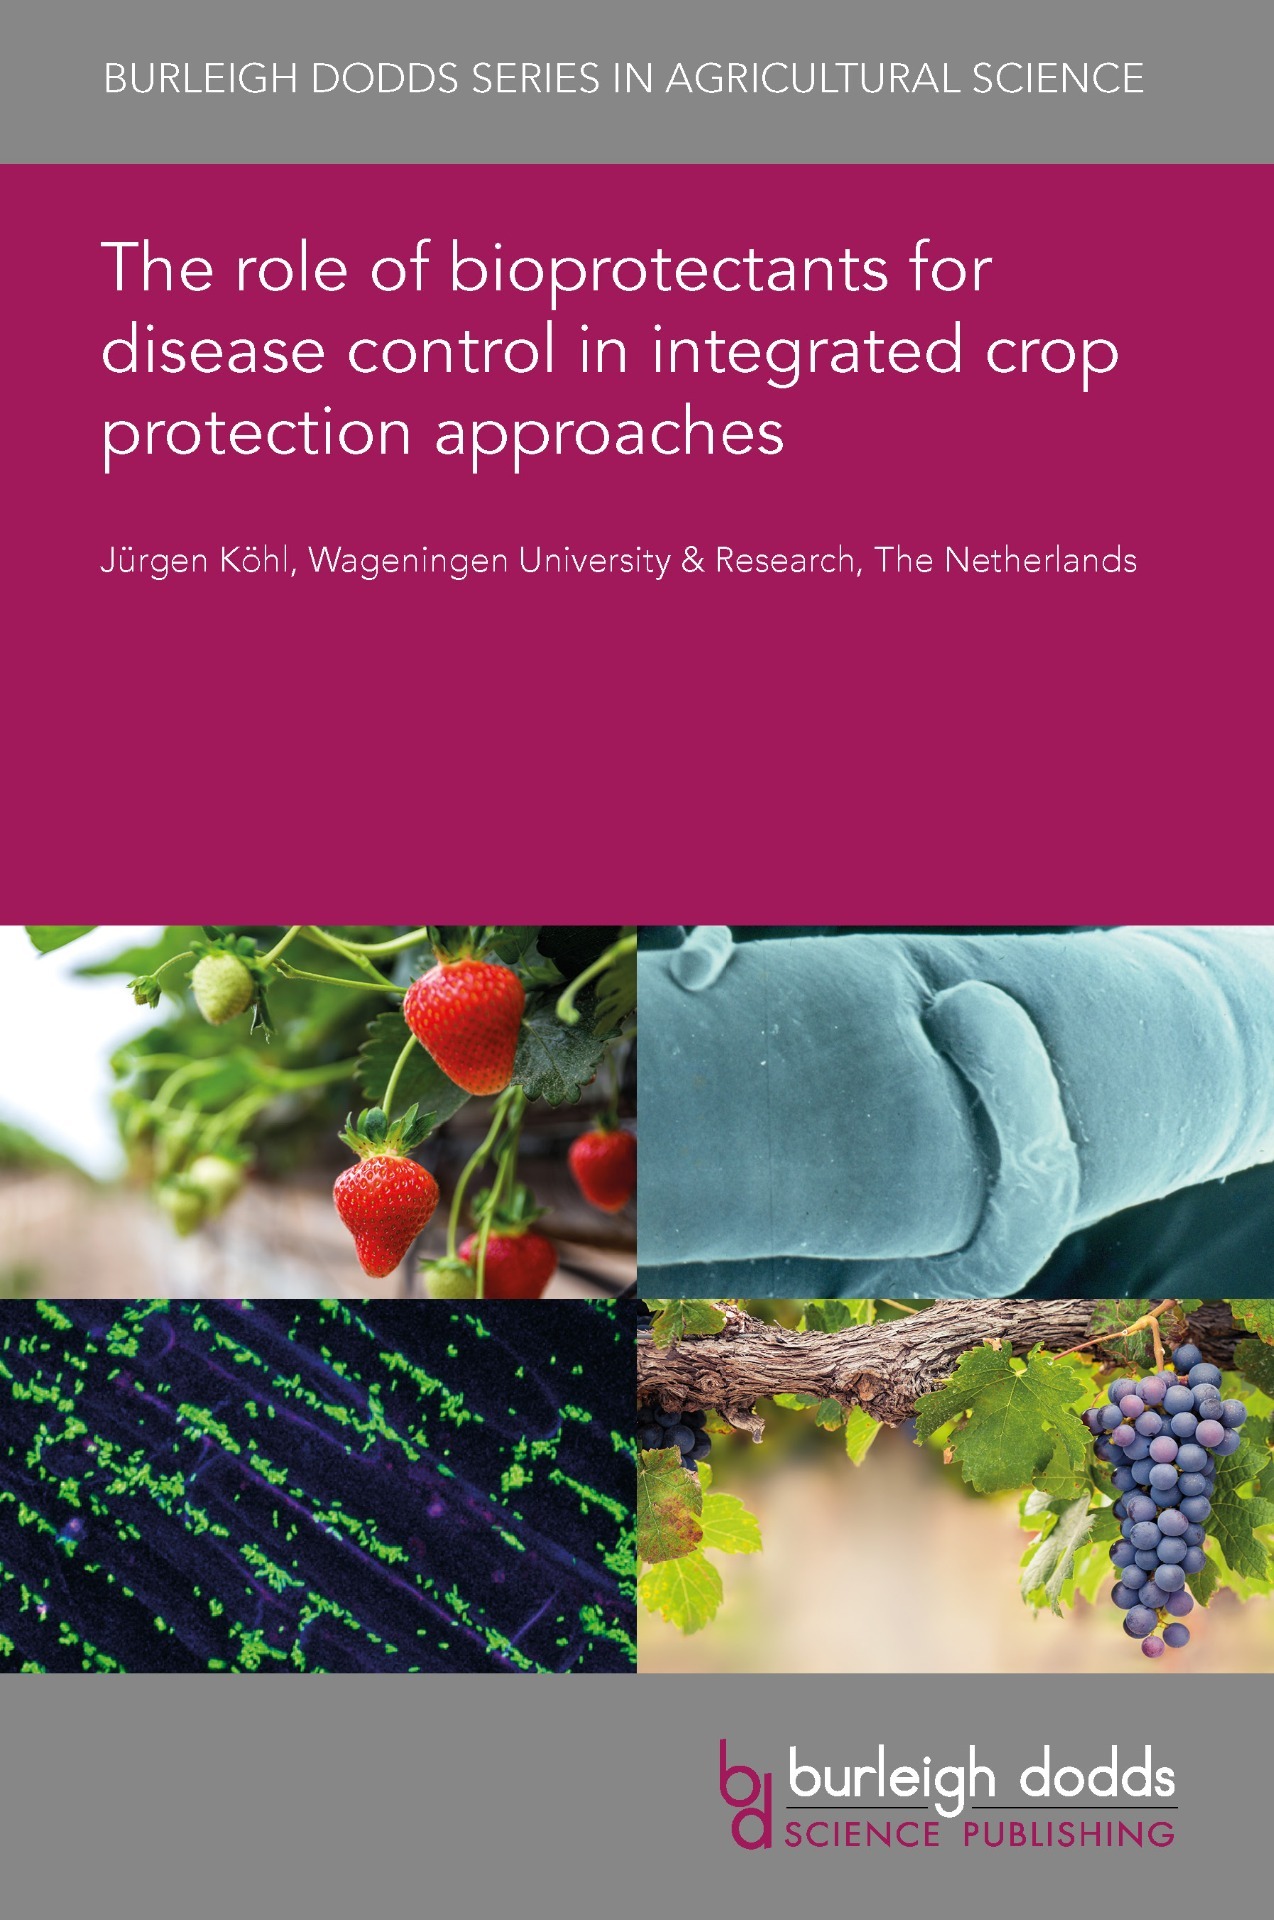 The role of bioprotectants for disease control in integrated crop protection approaches